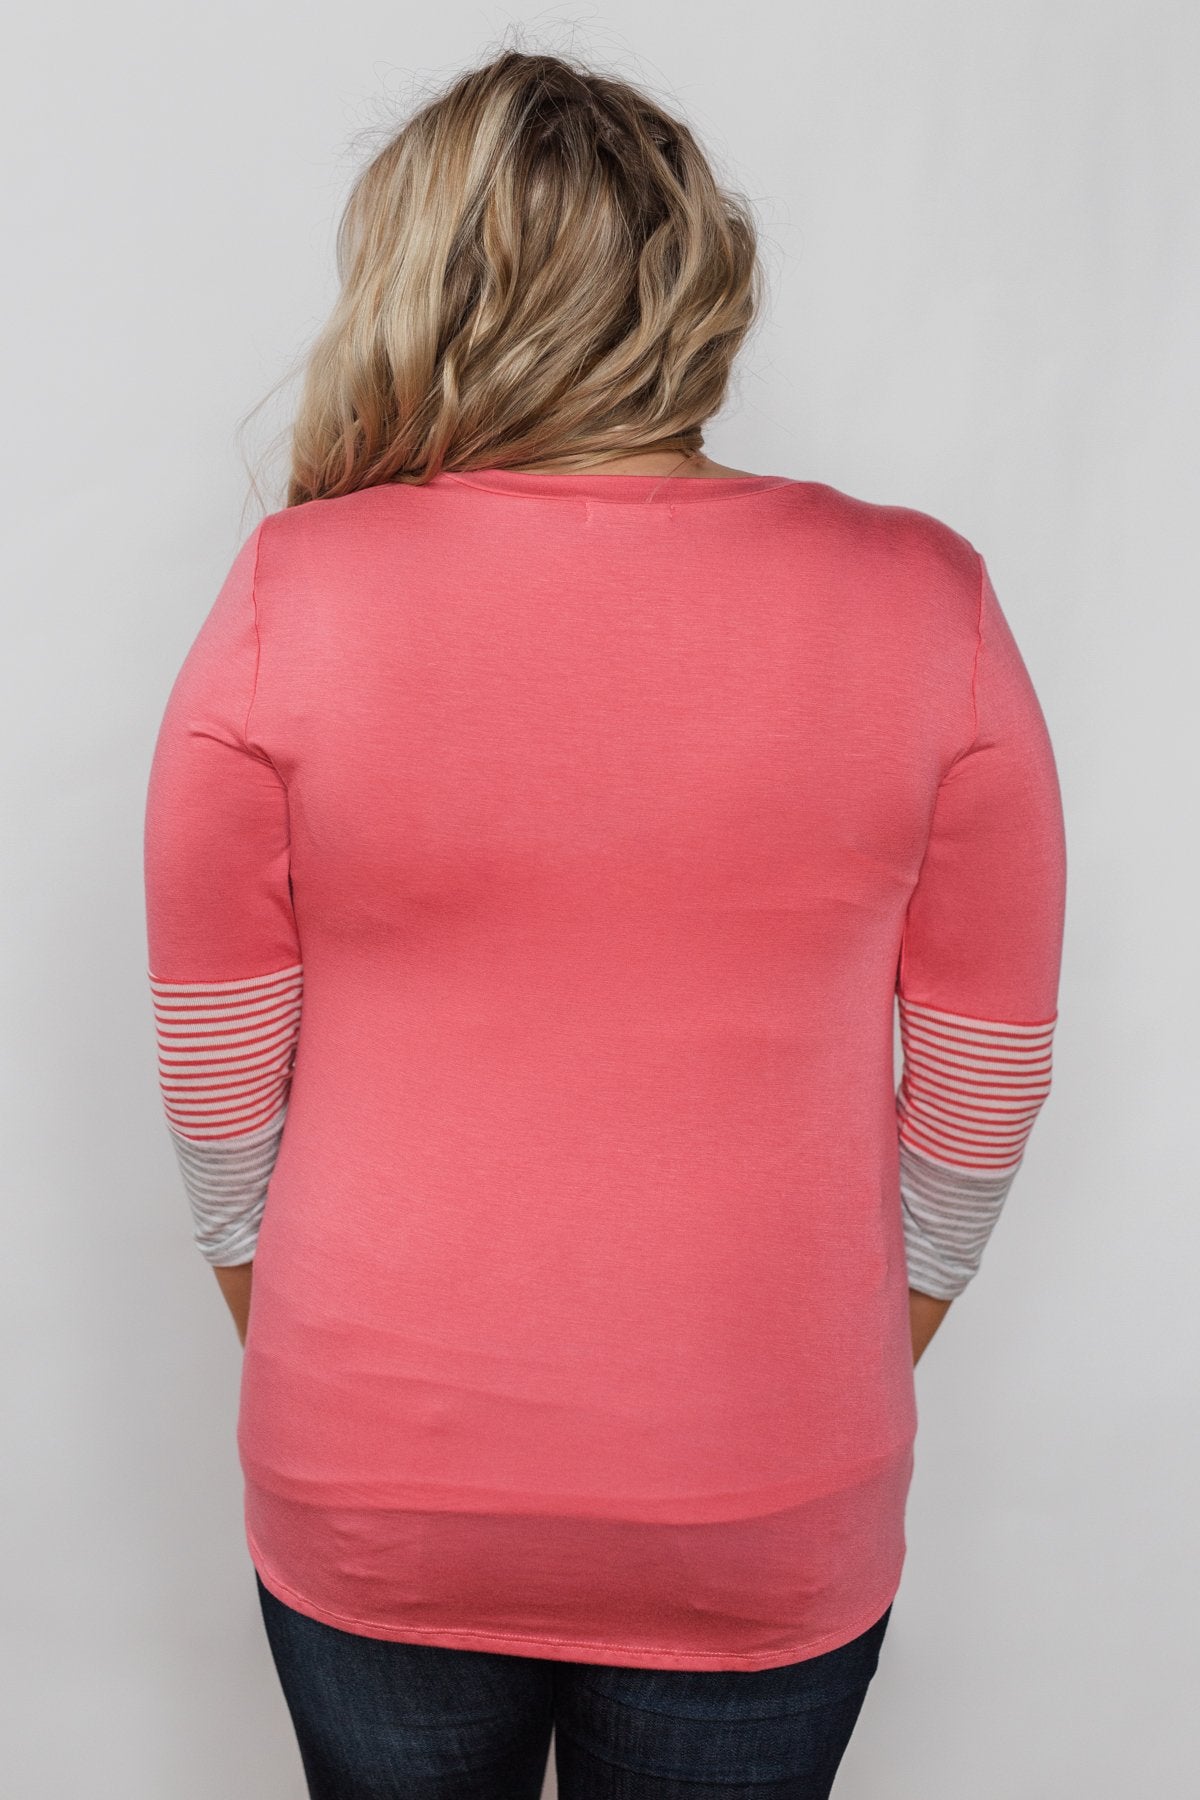 Longing For You Striped Sleeve Top - Punch Pink